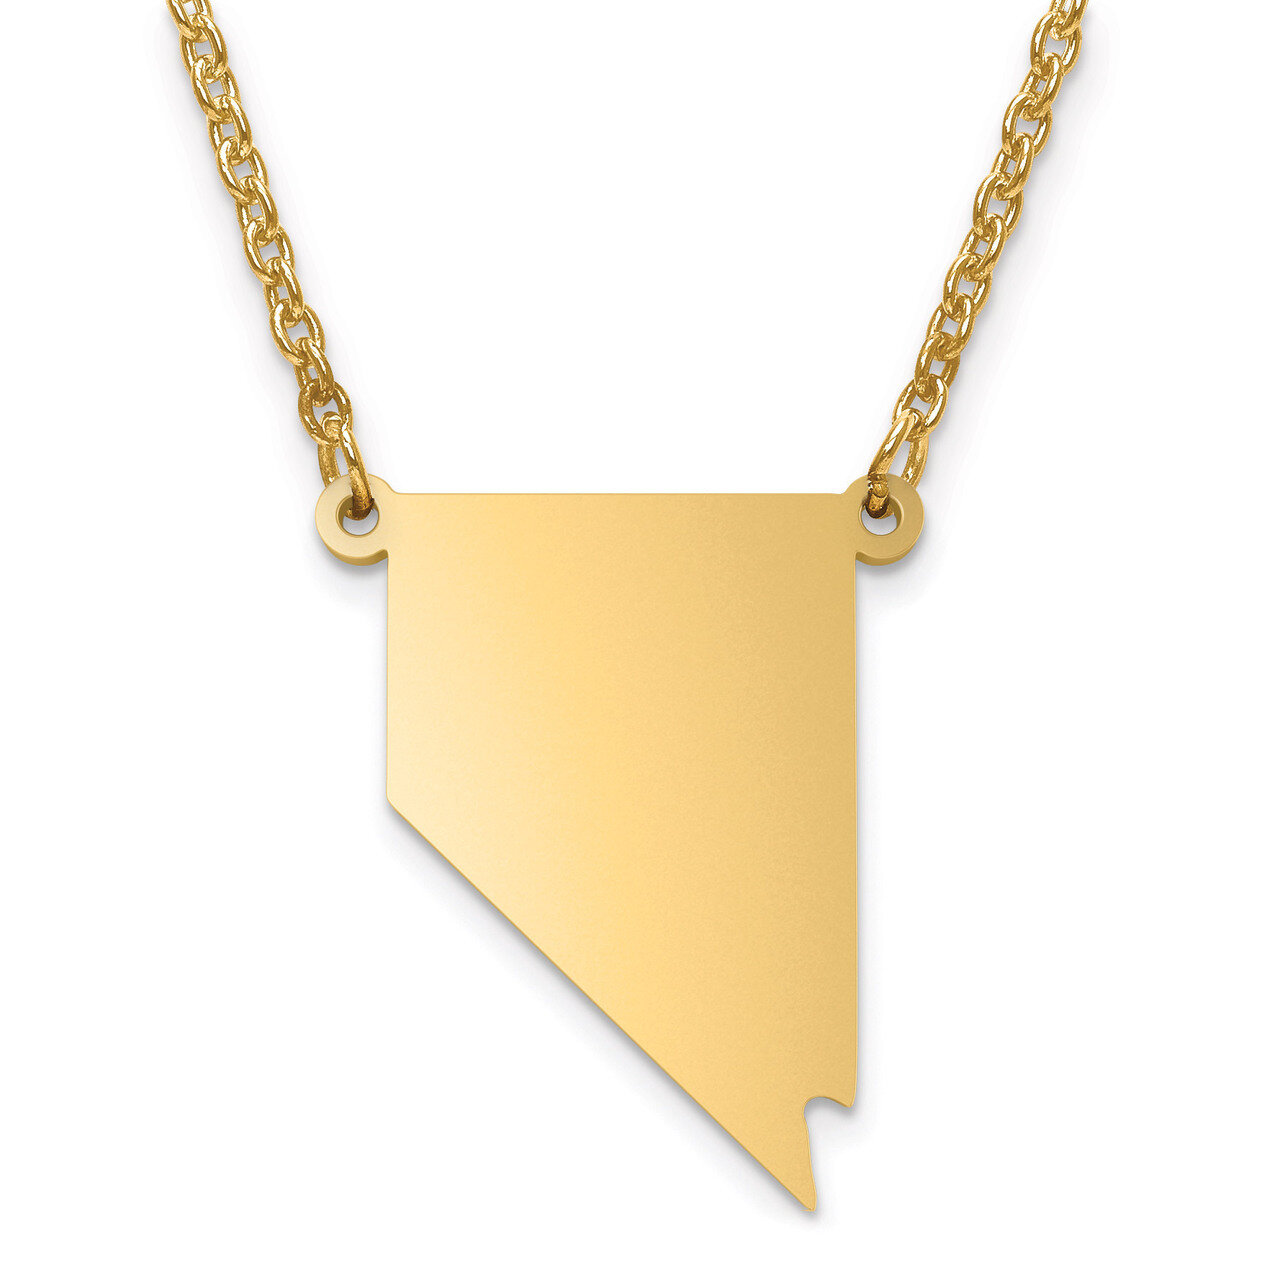 Nevada State Pendant with Chain Engravable Gold-plated on Sterling Silver